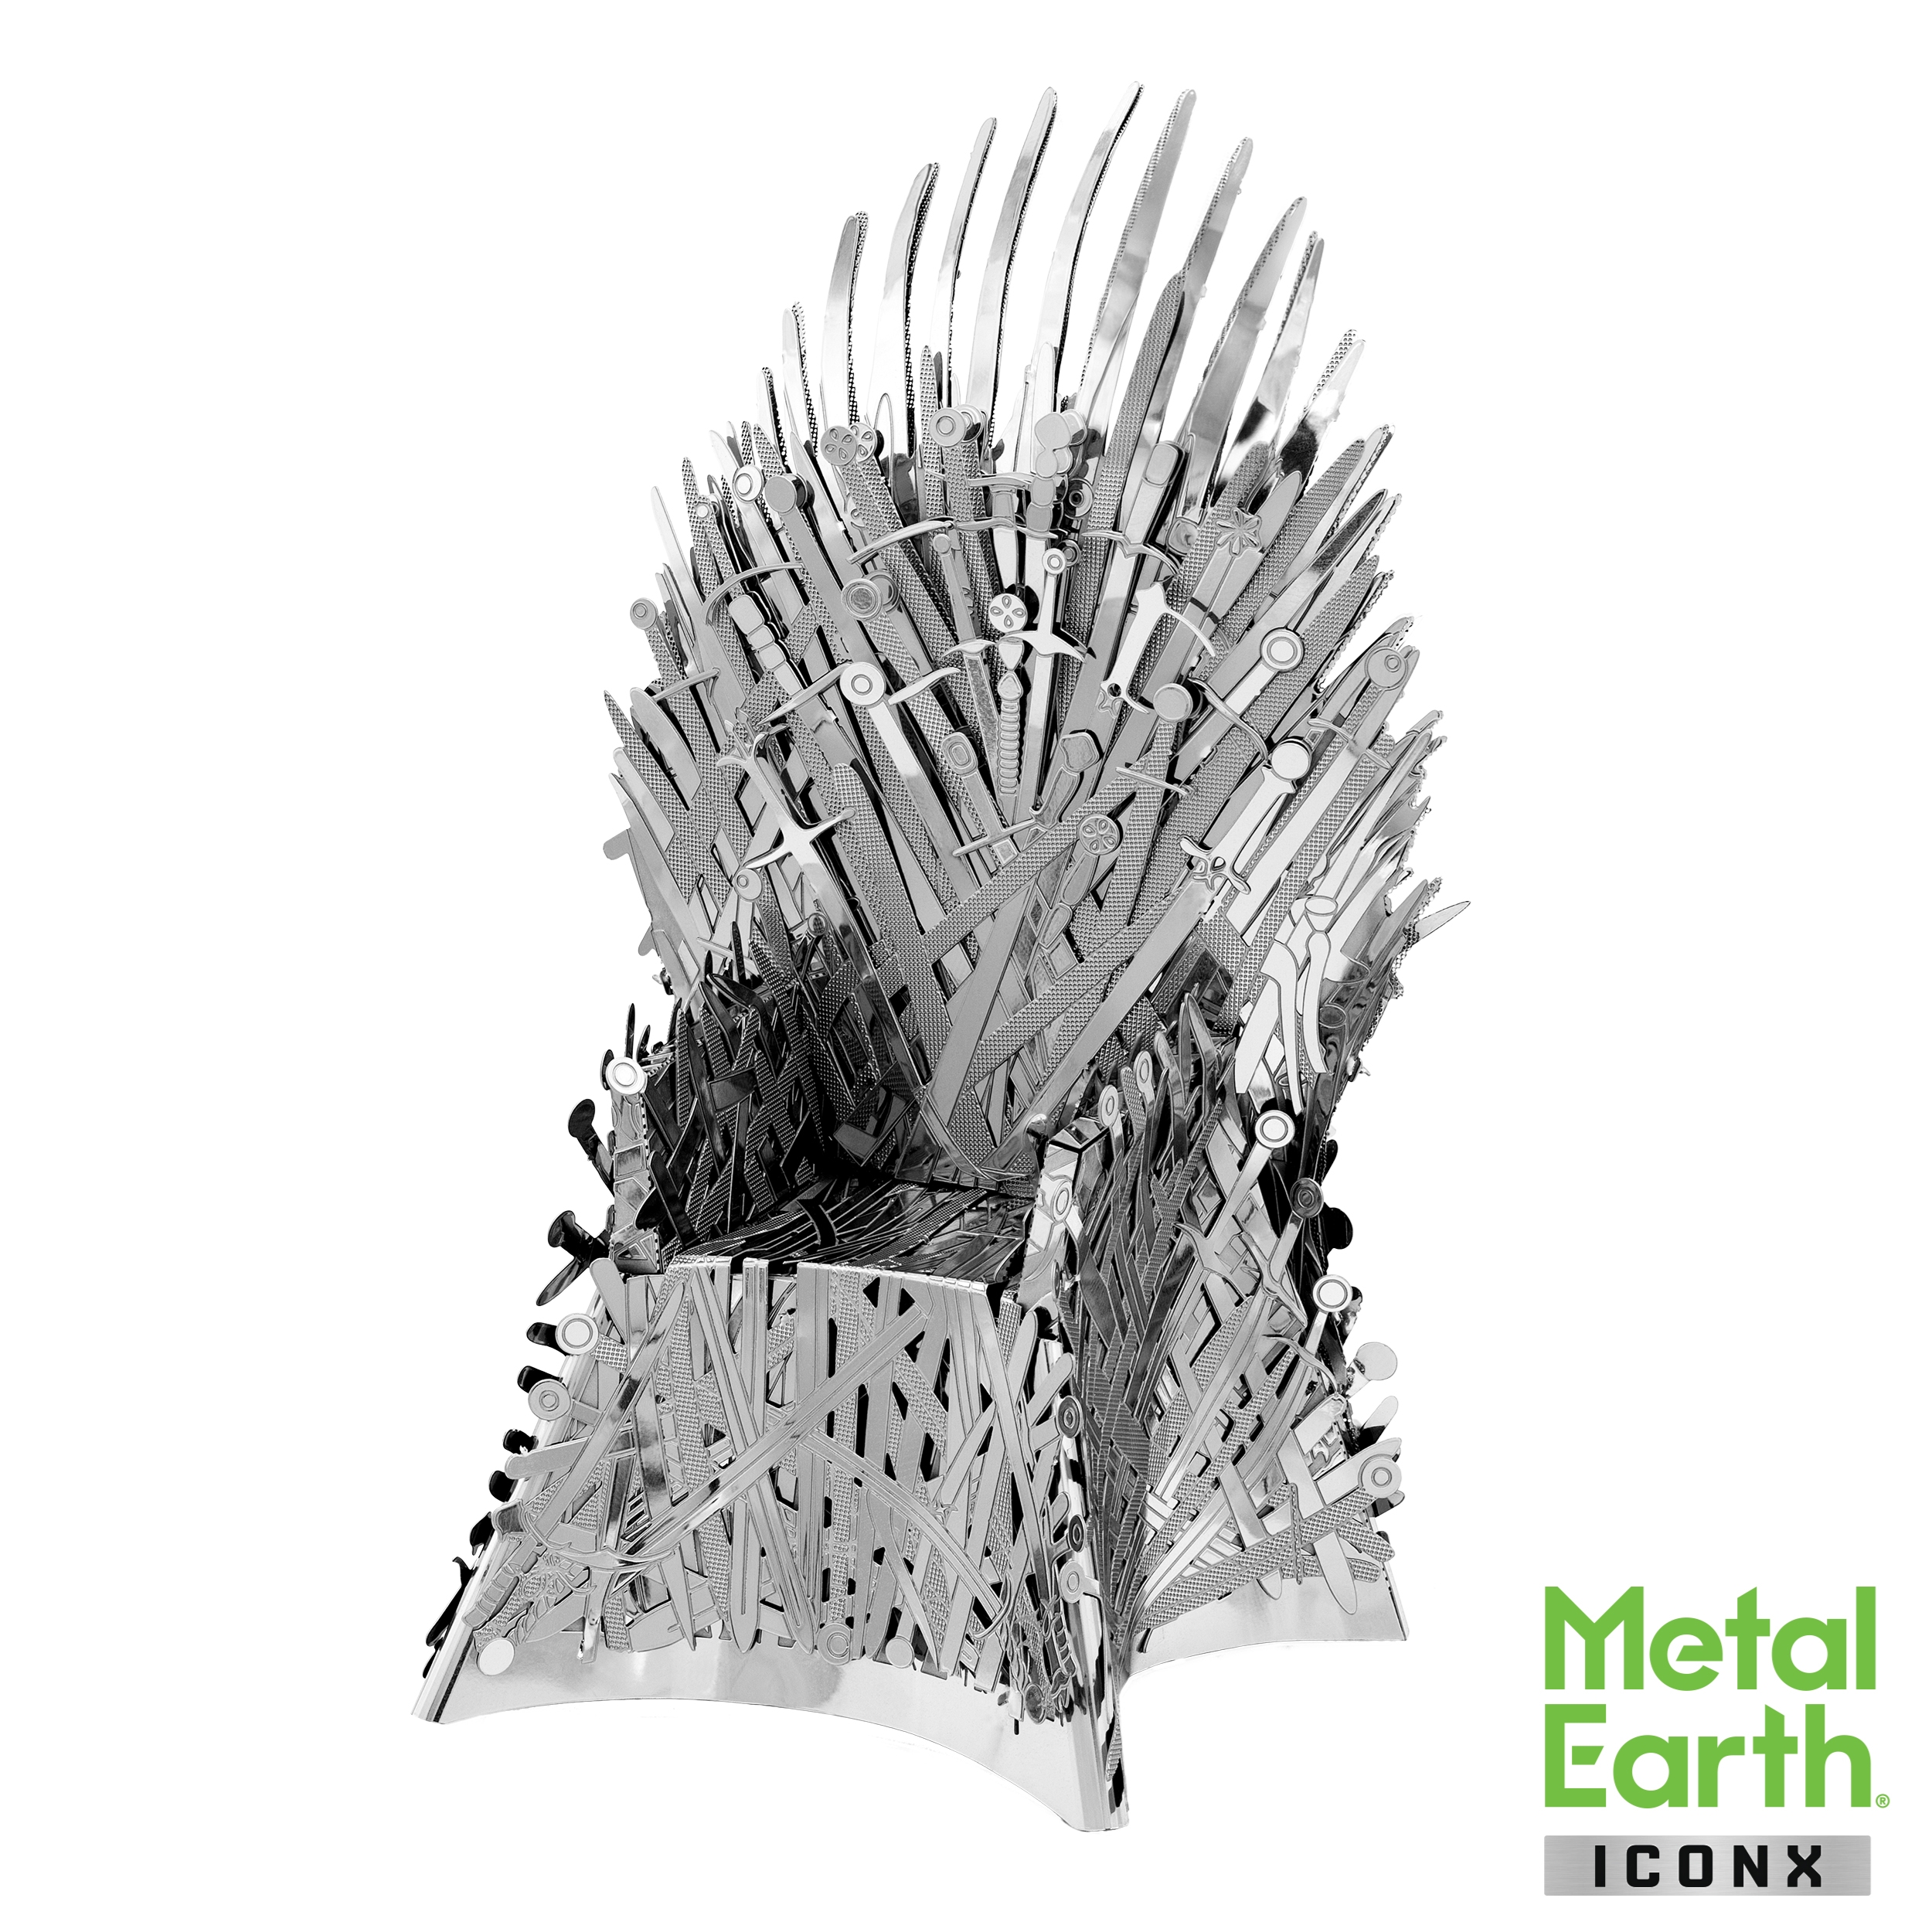 The Iron Throne Model - Game of Thrones models by Metal Earth